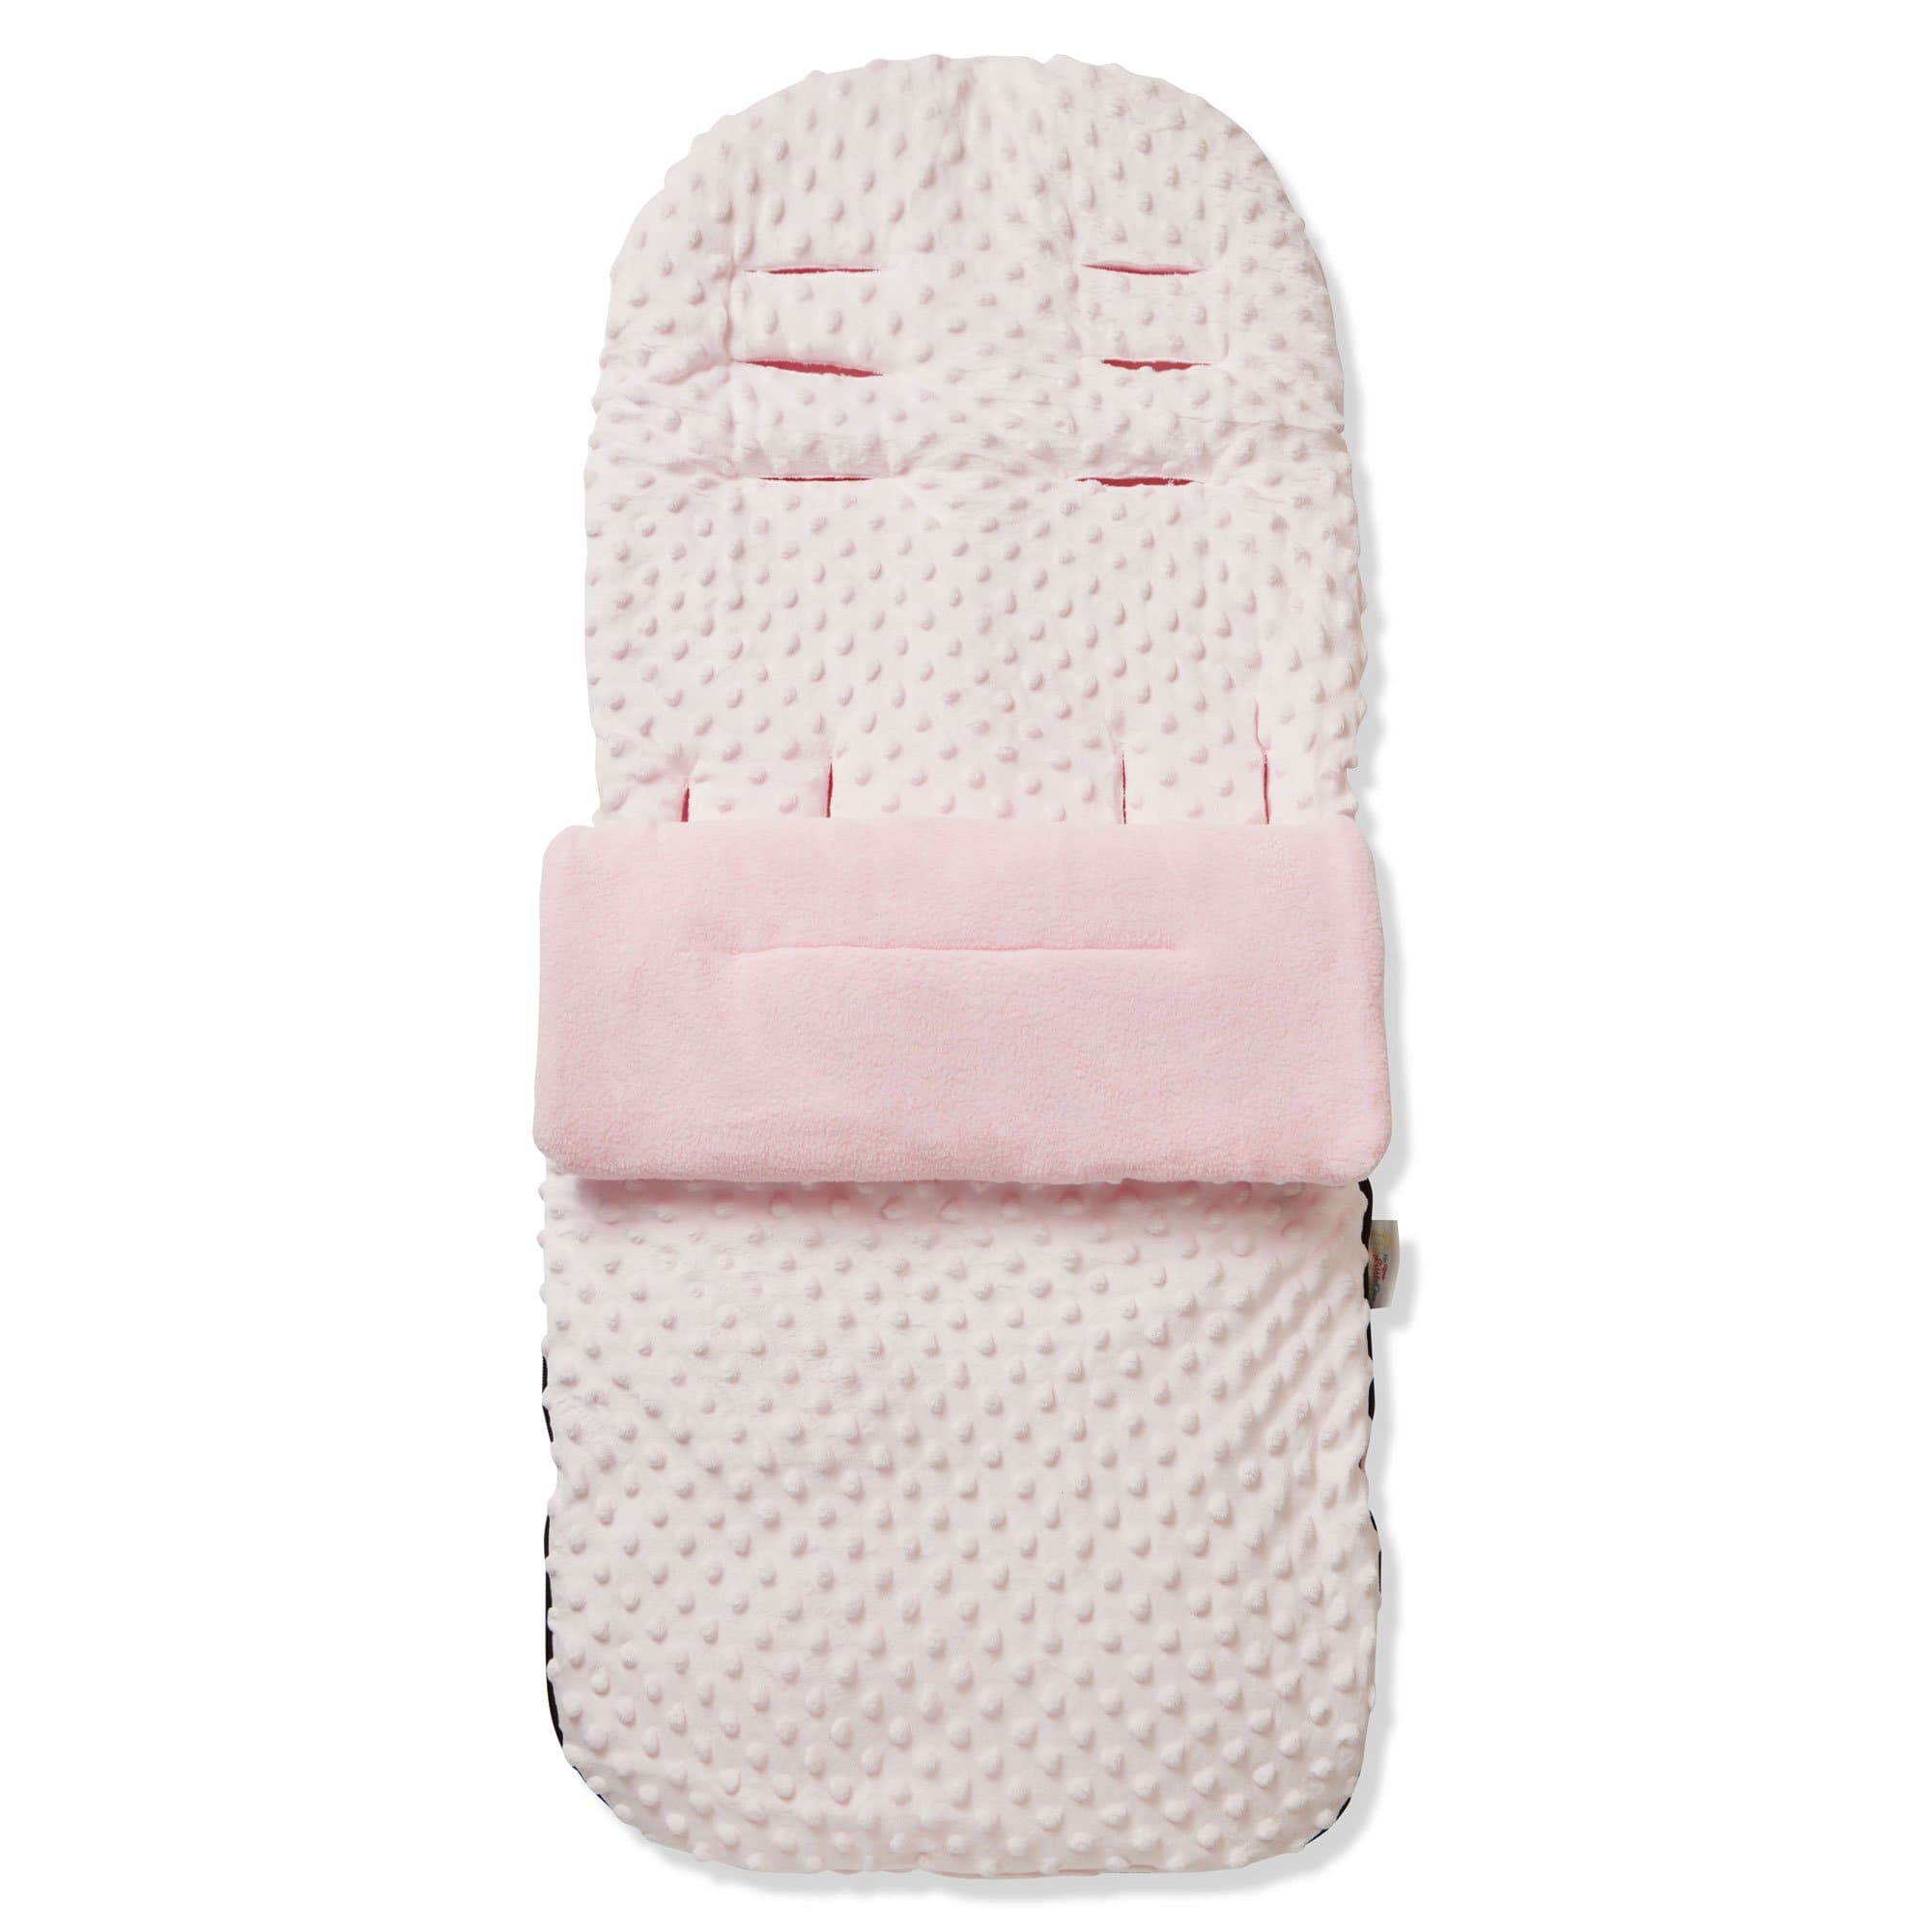 Dimple Footmuff / Cosy Toes Compatible with Safety 1st - Pink / Fits All Models | For Your Little One